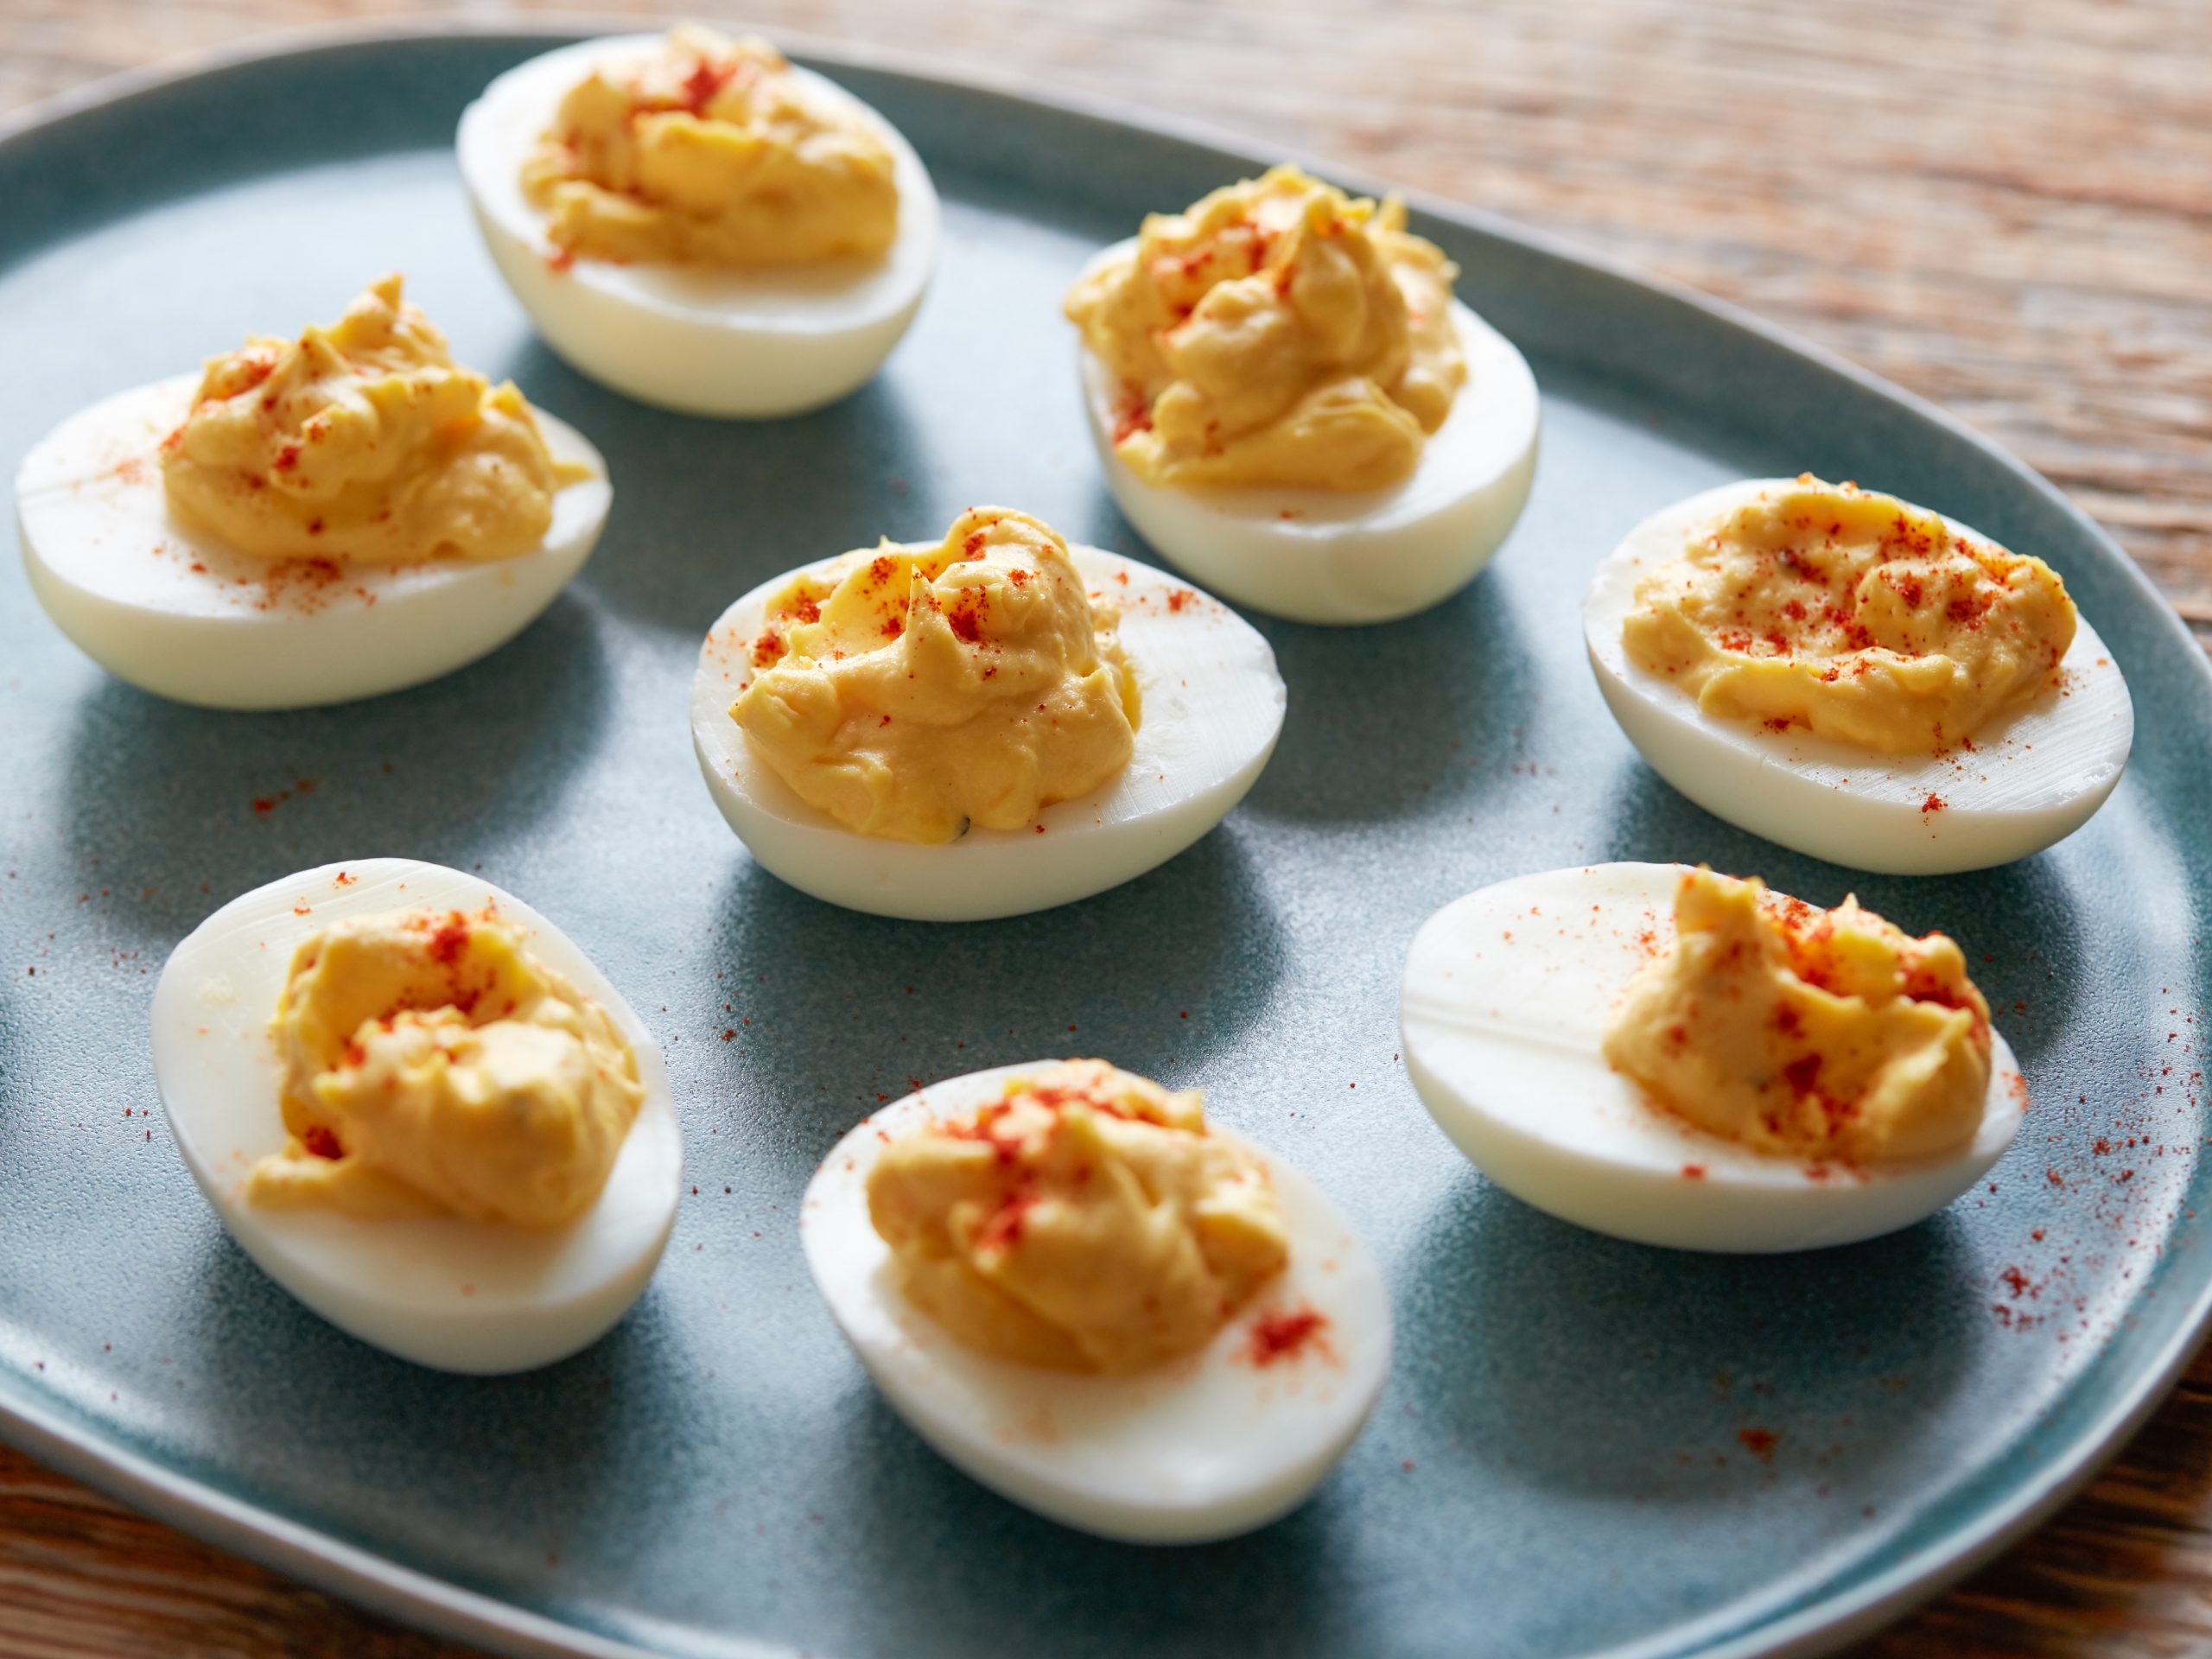 How to Make Devilled Eggs